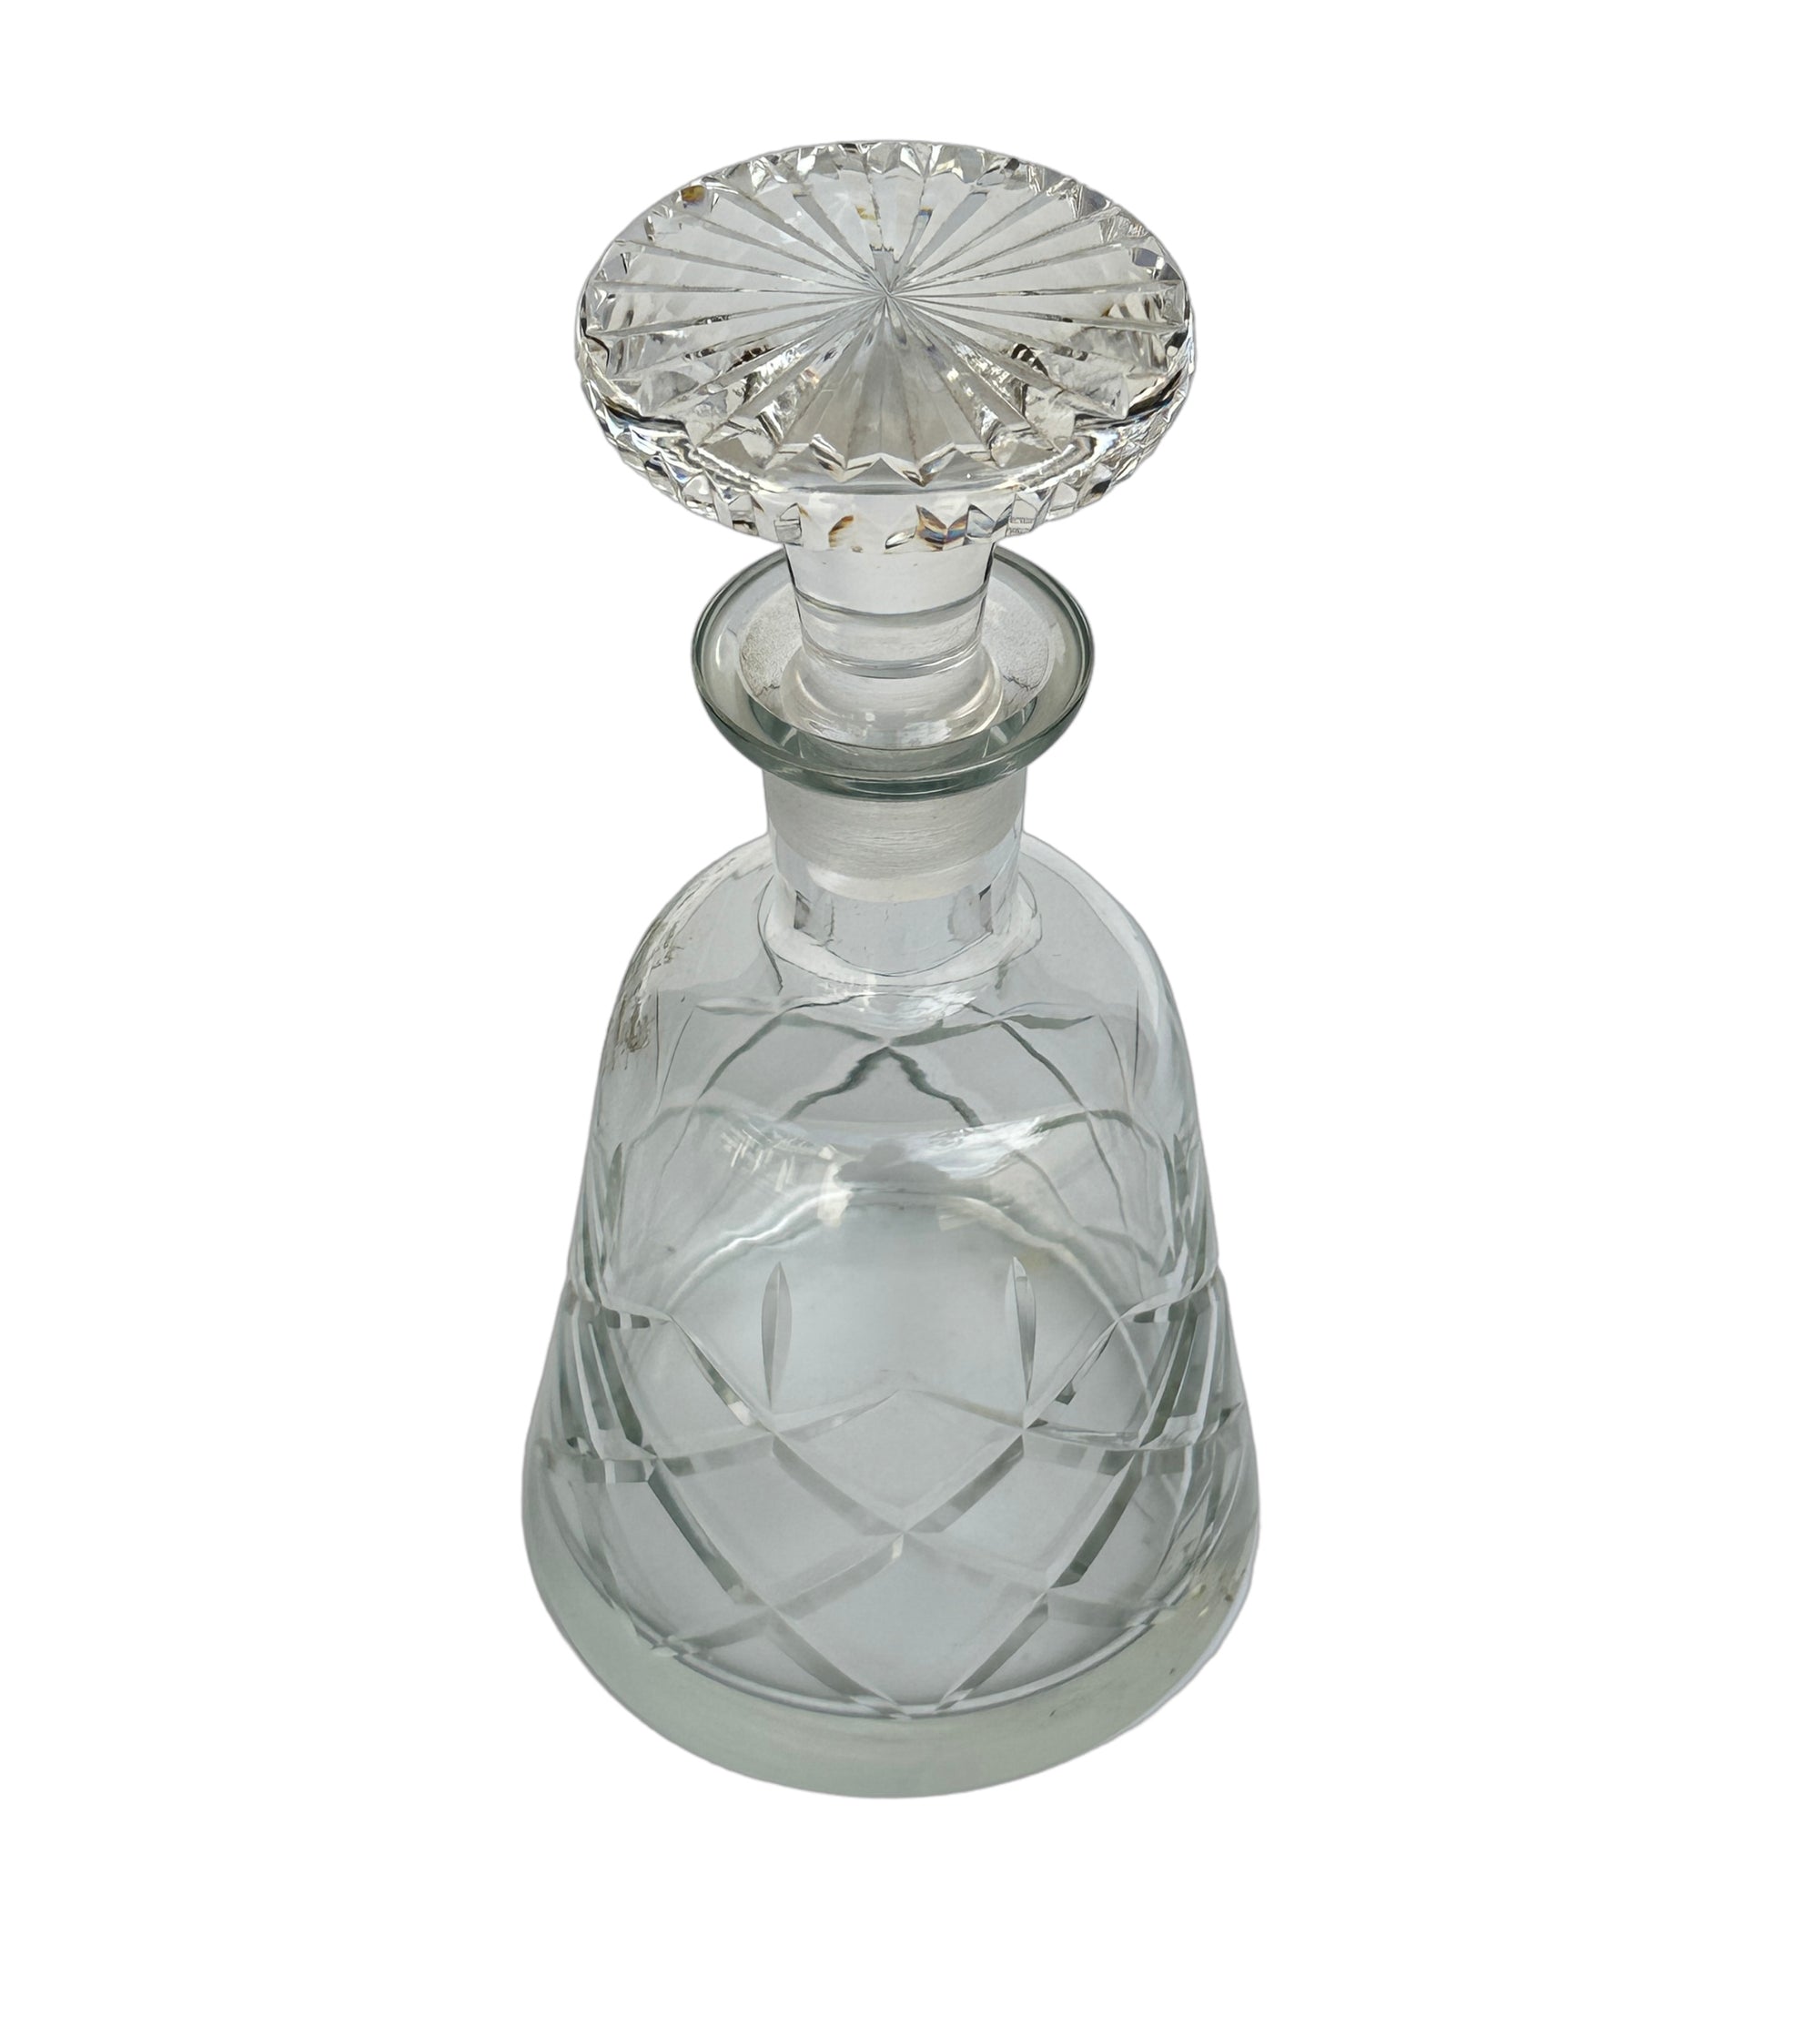 Vintage Cut Glass Whiskey Decanter